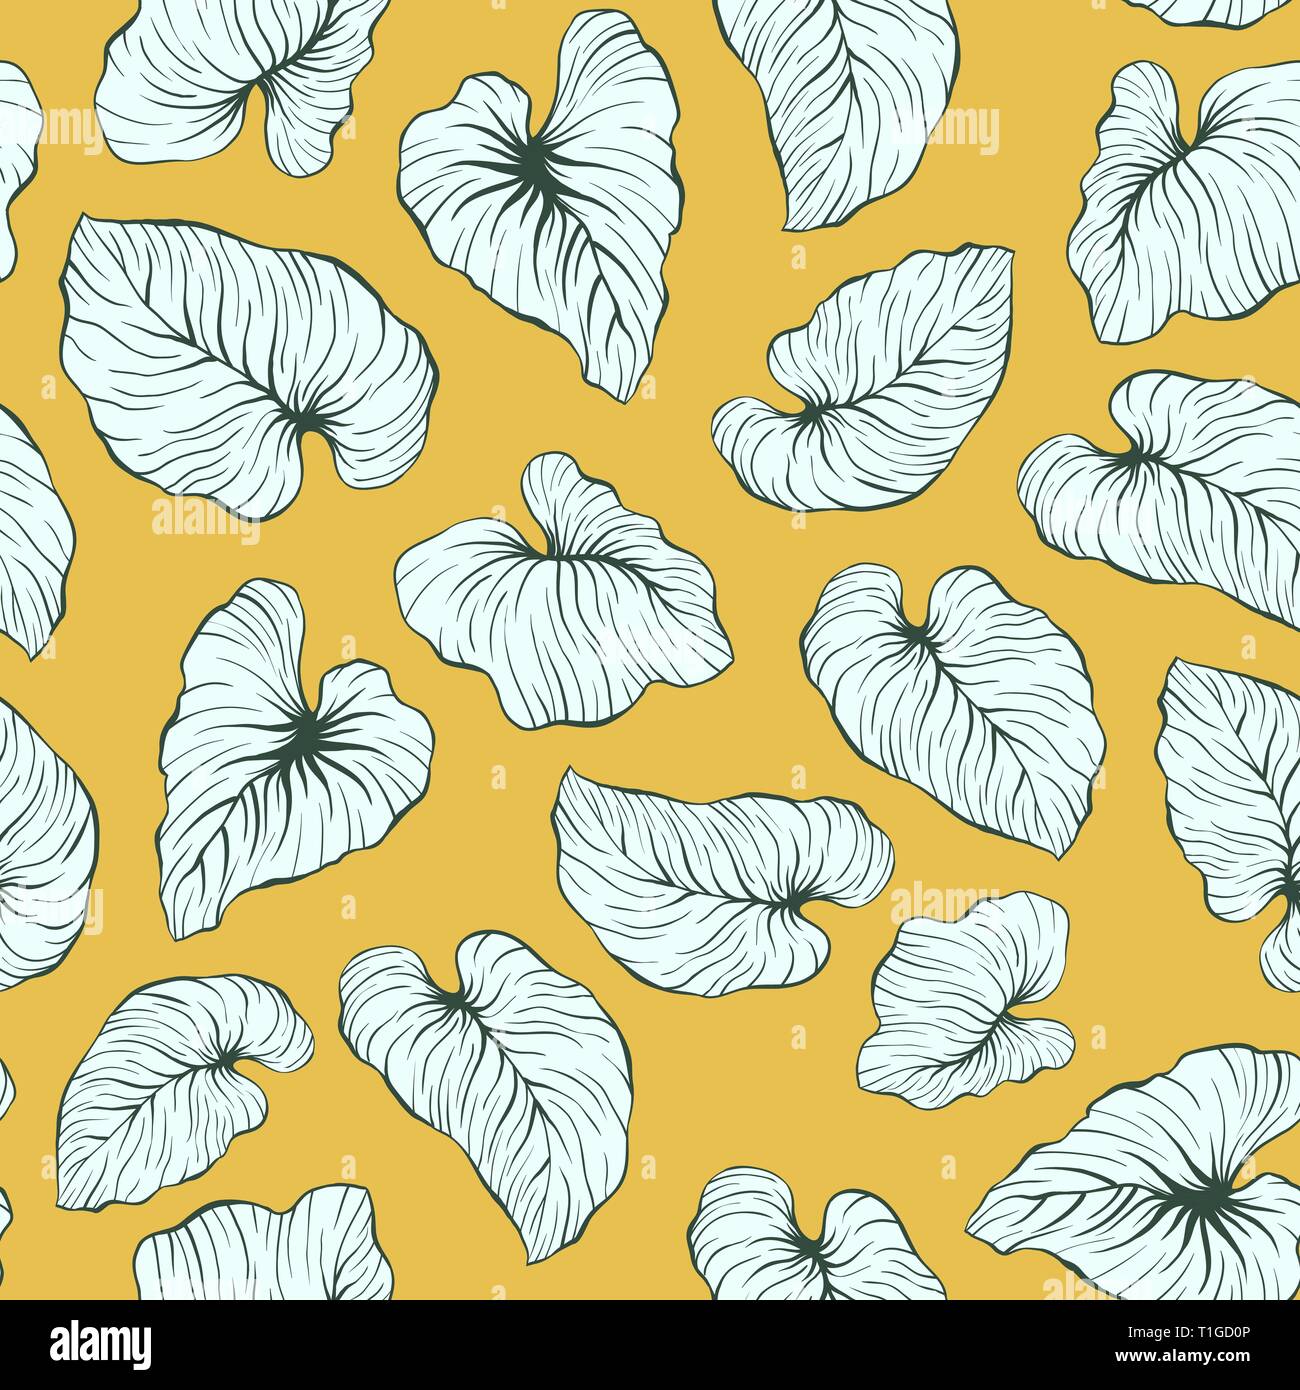 Yellow Falling Palm Leaves Repeat Seamless Vector Pattern Stock Vector